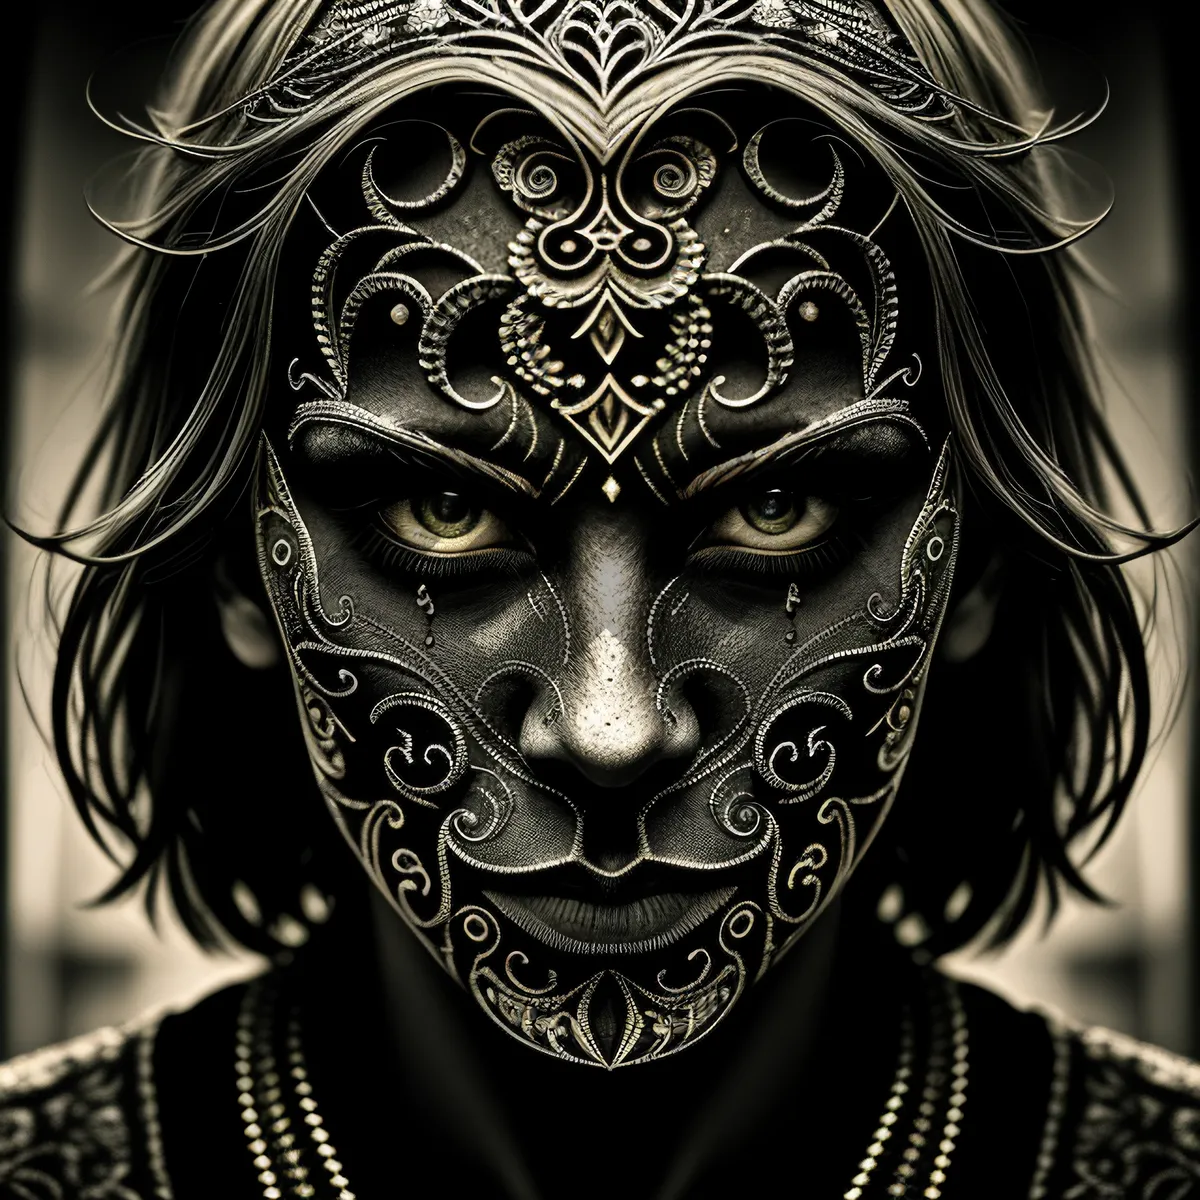 Picture of Golden Mask: Intricate Artistic Face Covering